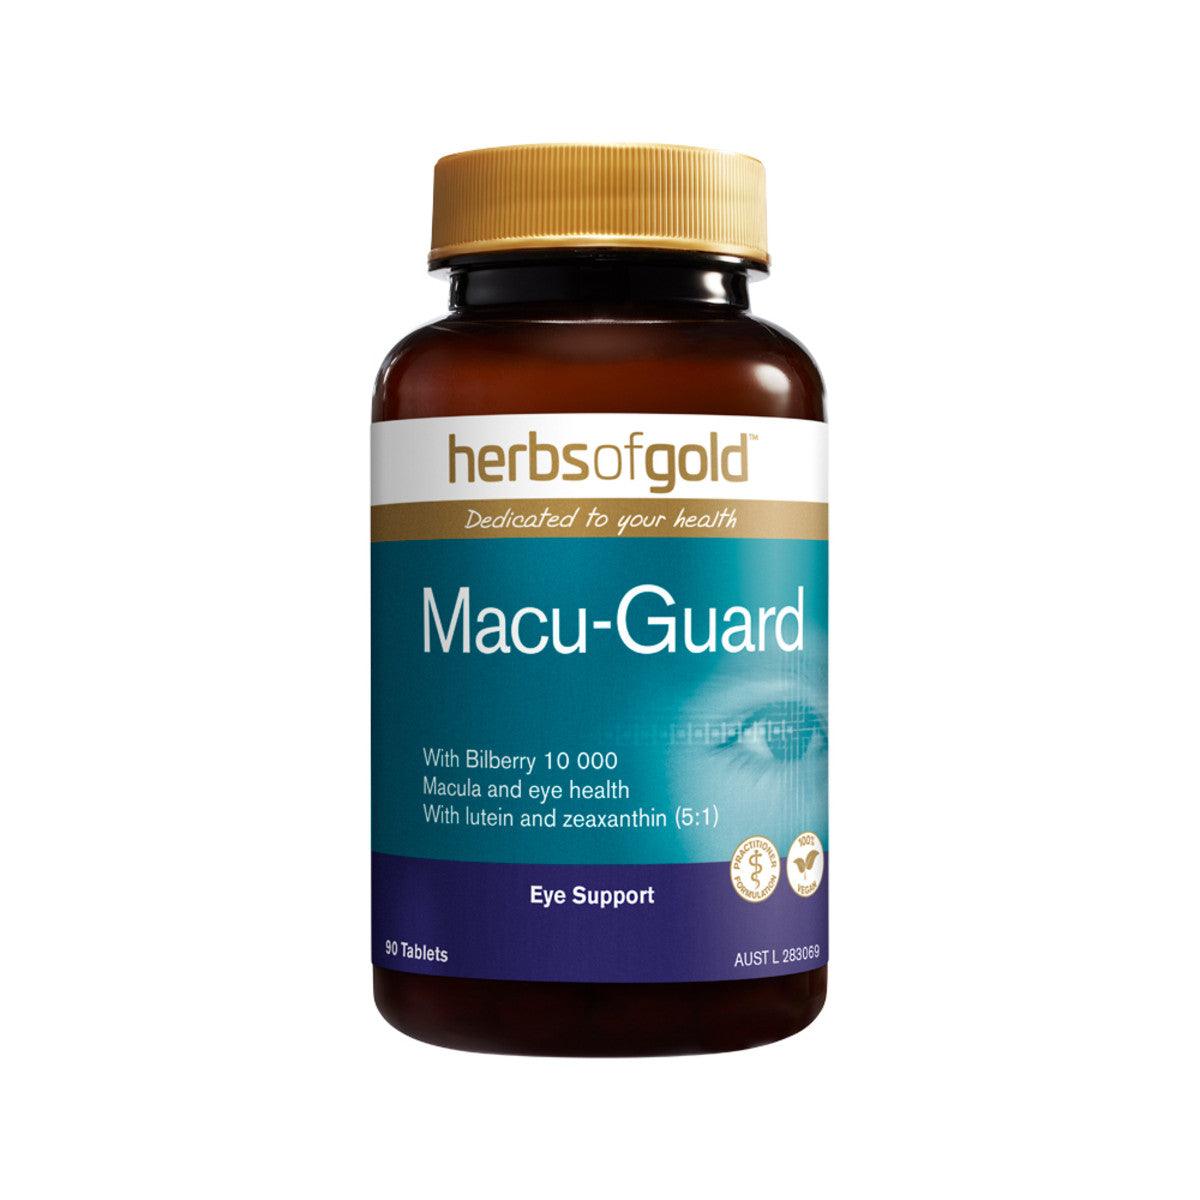 Herbs of Gold Macu-Guard with Bilberry 10,000 90 Tablets - QVM Vitamins™